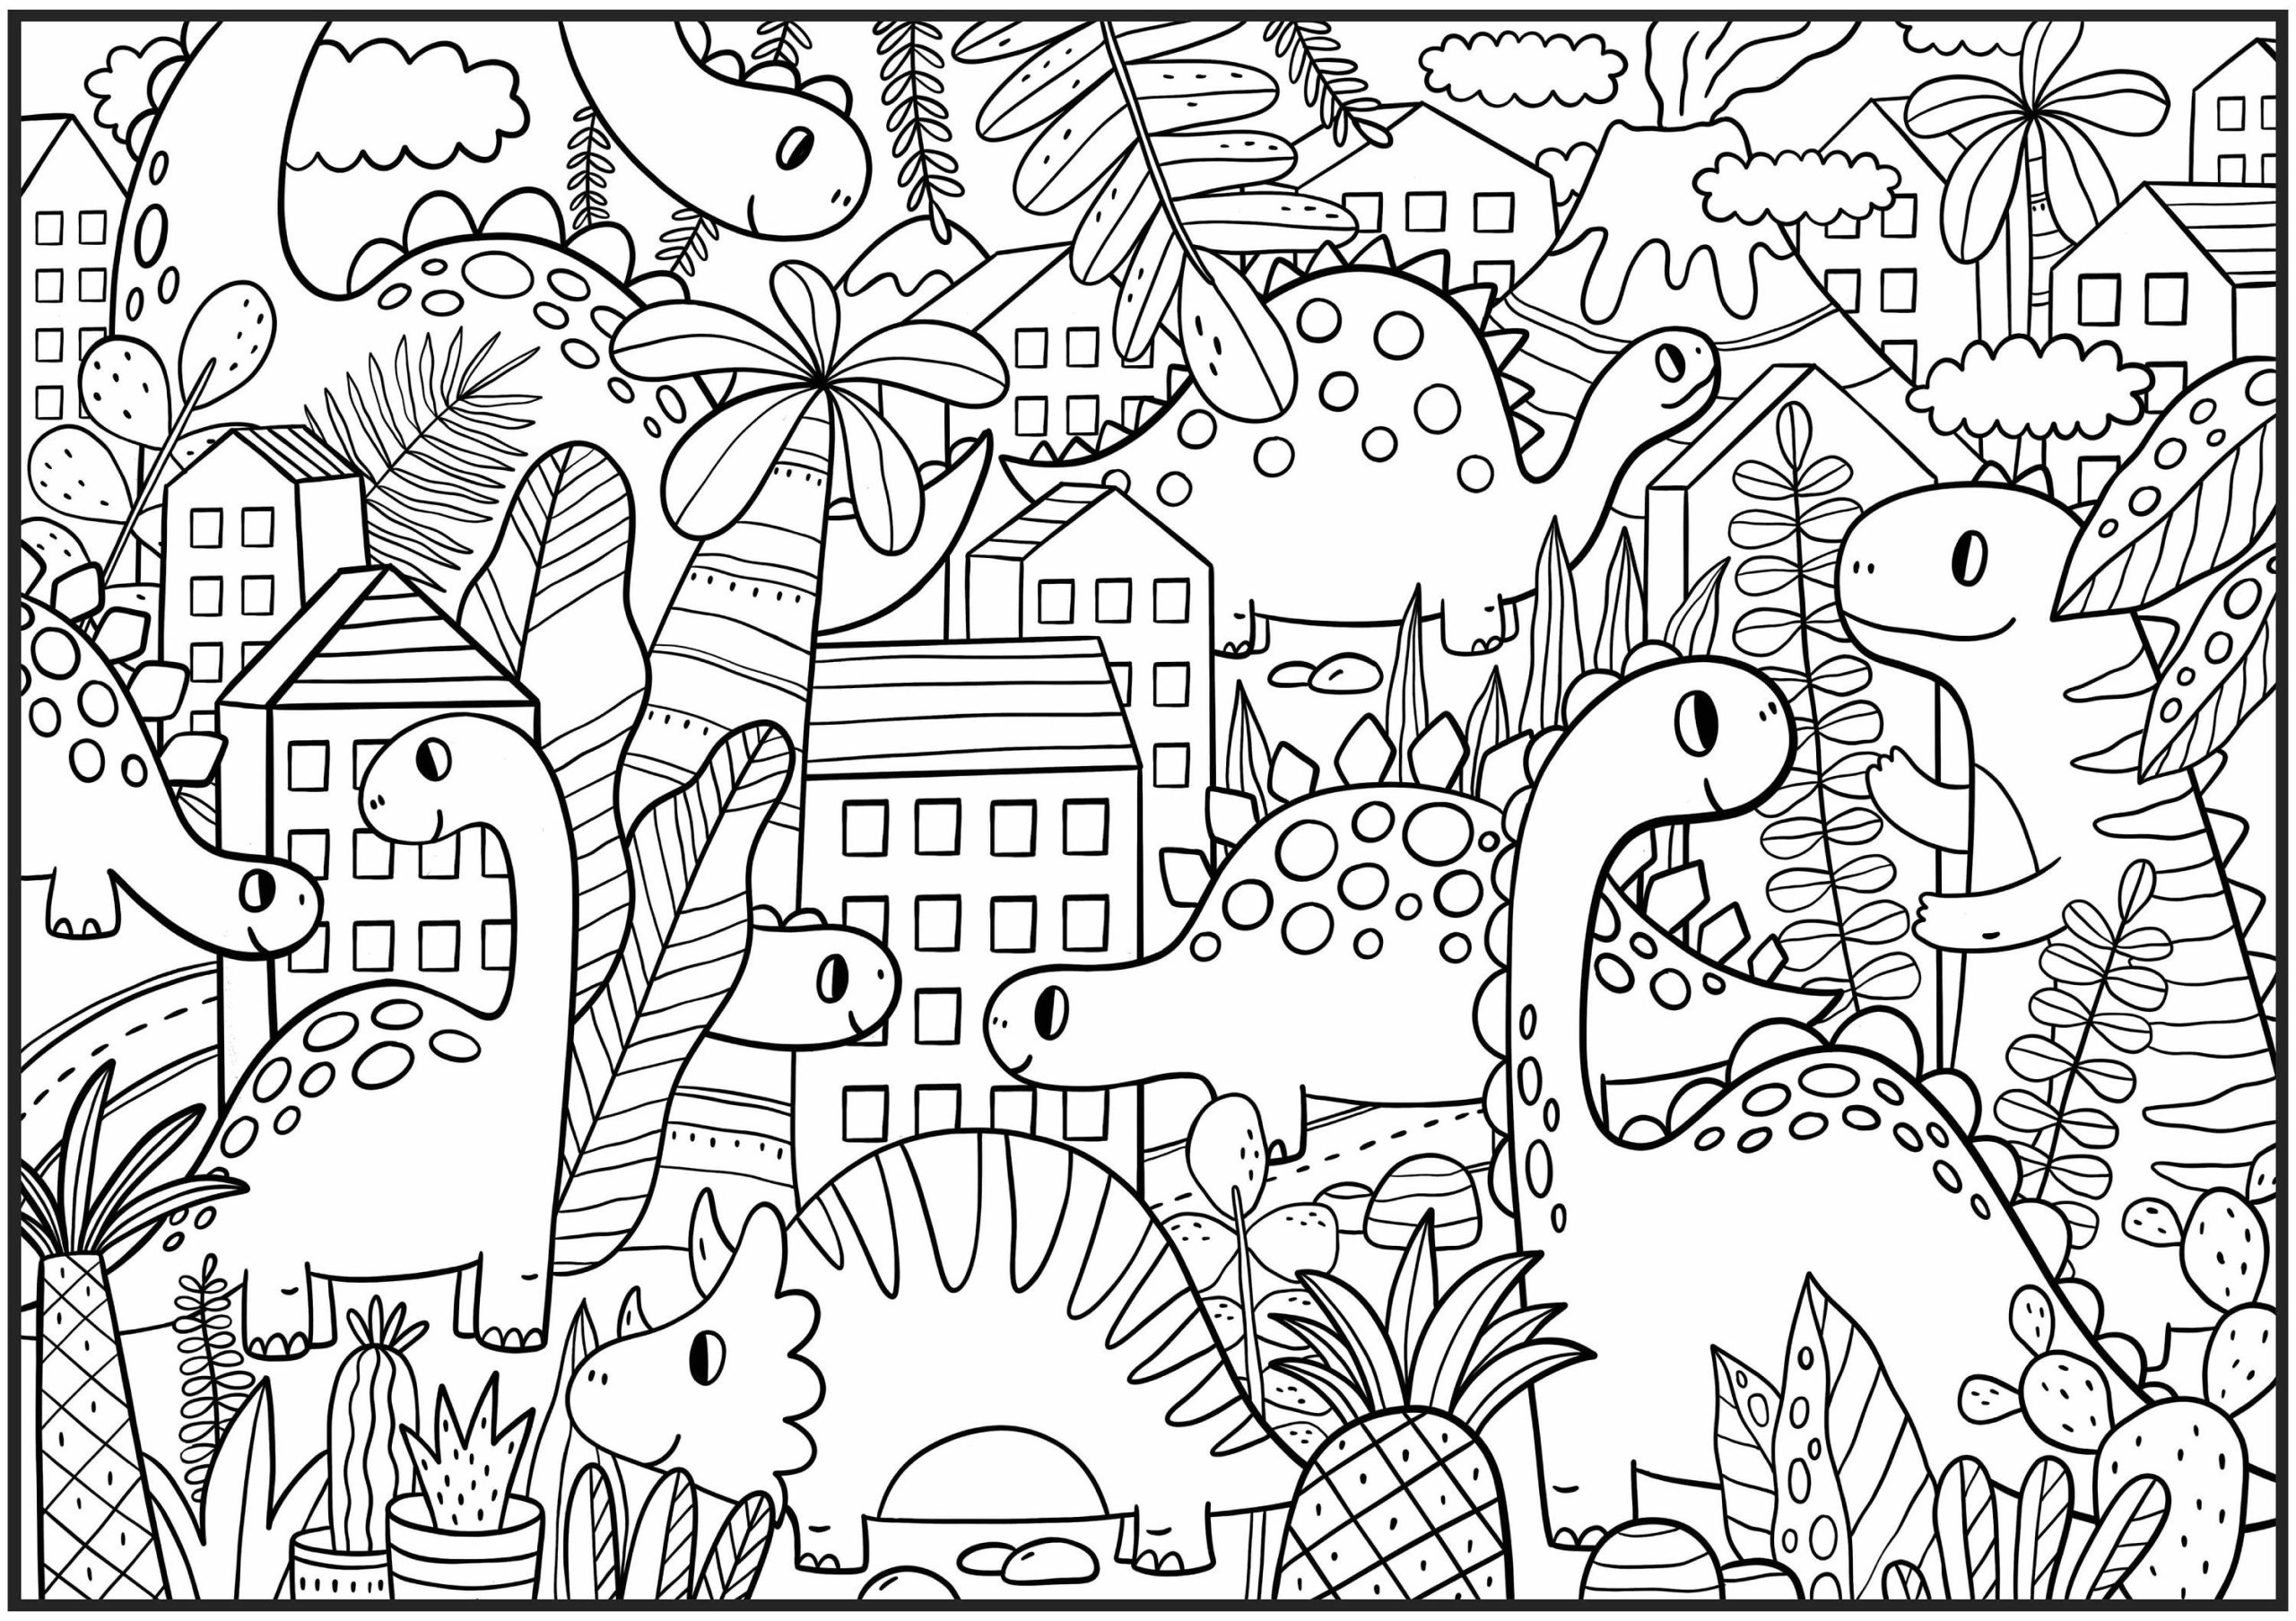 Super Huge Dinosaurs Coloring Poster - 3 Size - thick durable paper -Can be Personalized - Preschool